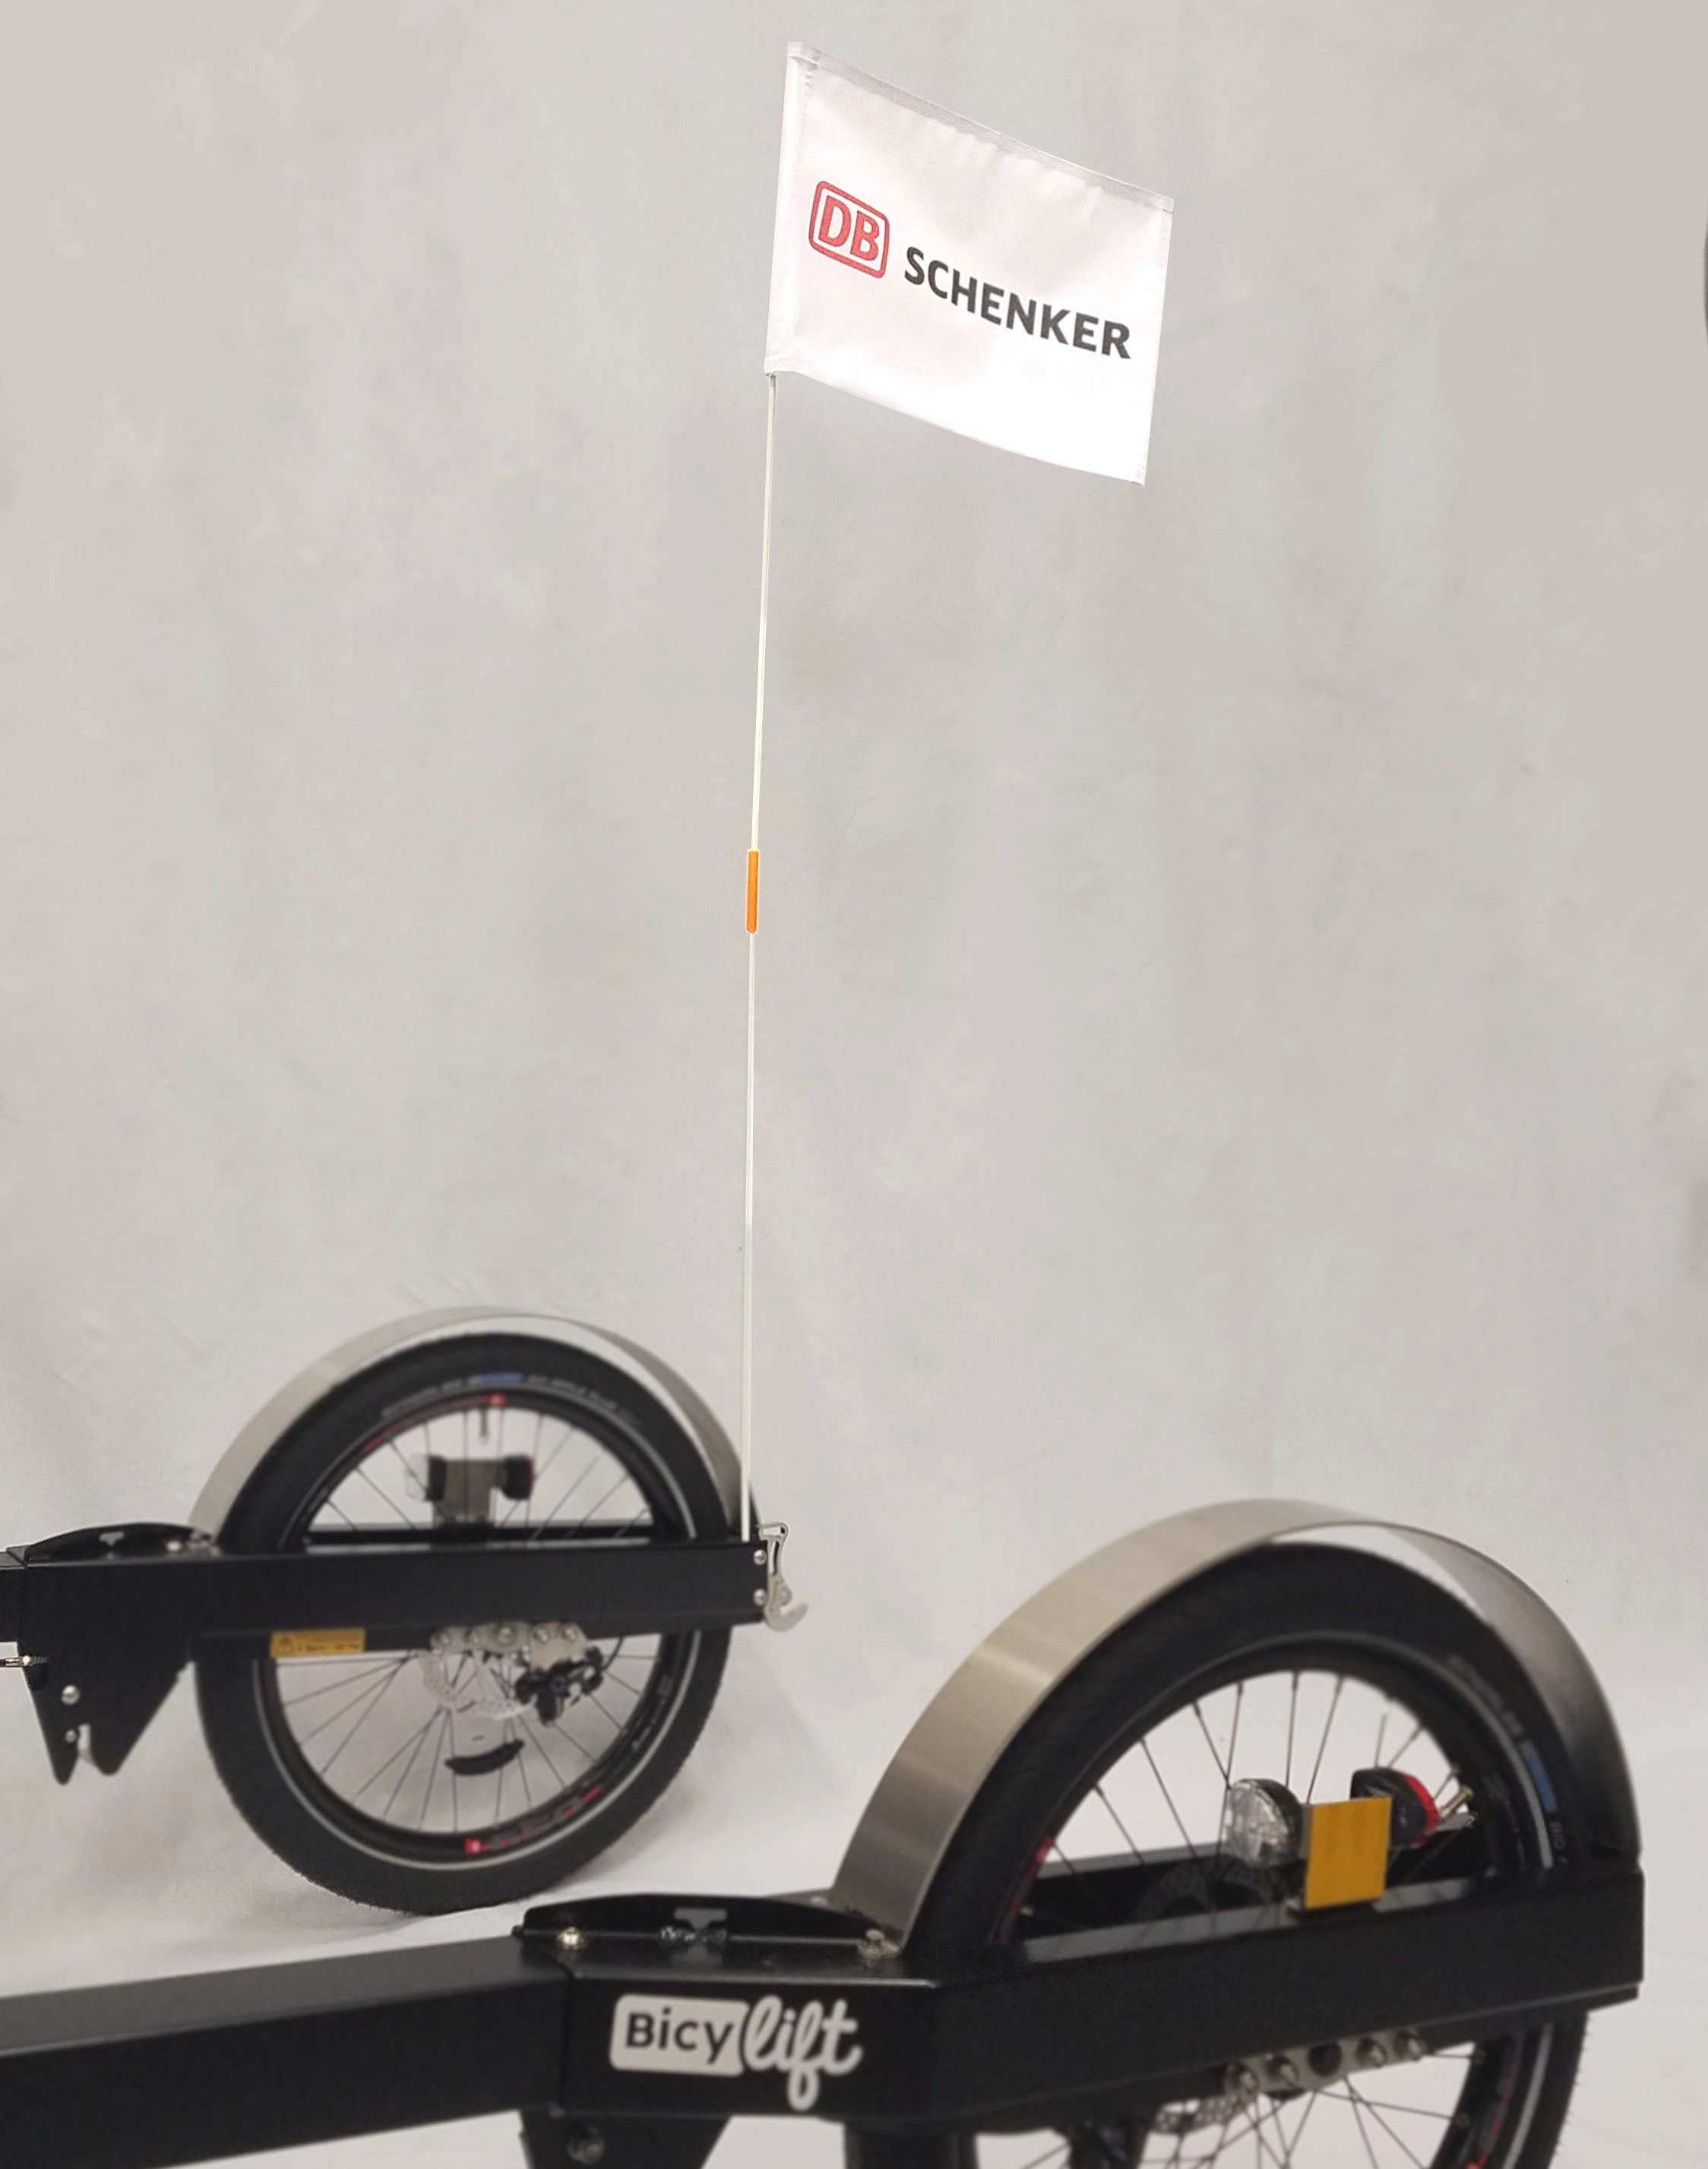 Part of the frame of the BicyLift bike trailer two wheel with mudguards and a front and back light, a signage flag is attached at the back of the trailer